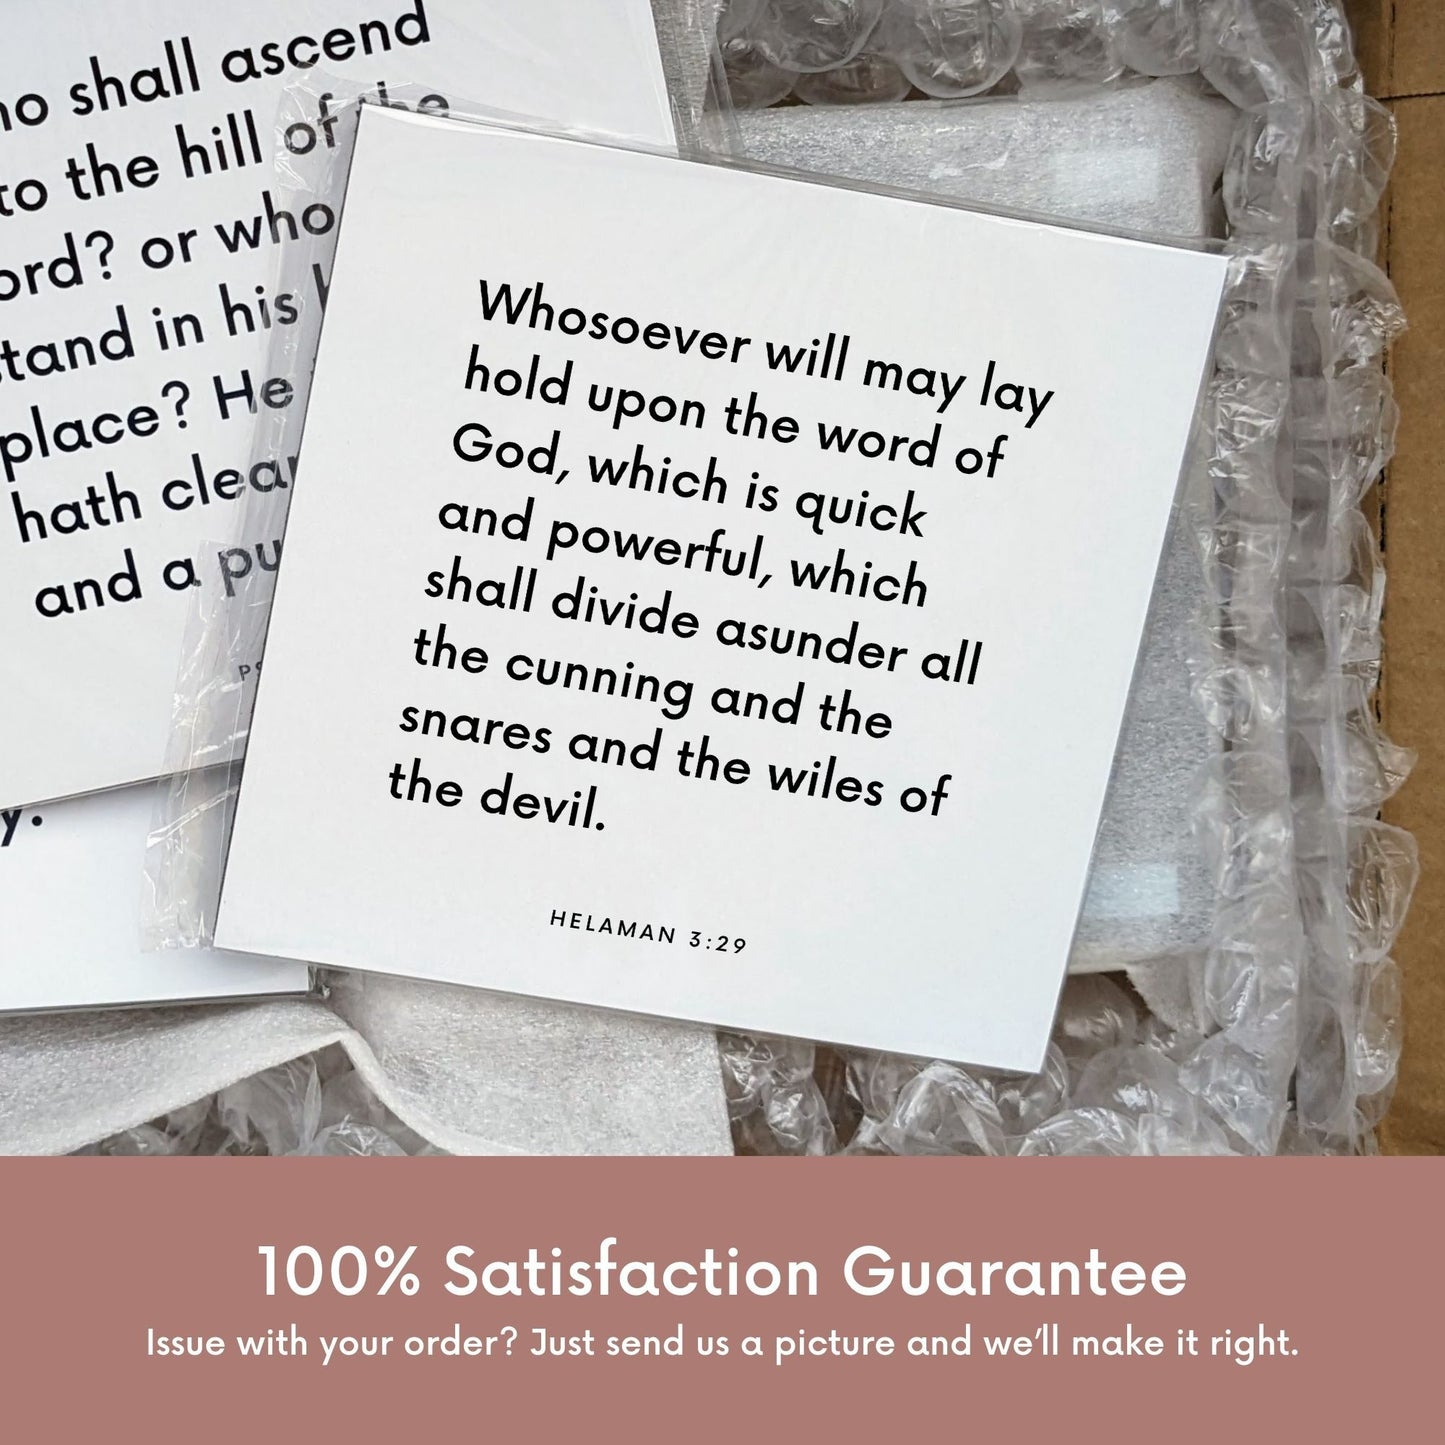 Shipping materials for scripture tile of Helaman 3:29 - "Whosoever will may lay hold upon the word of God"